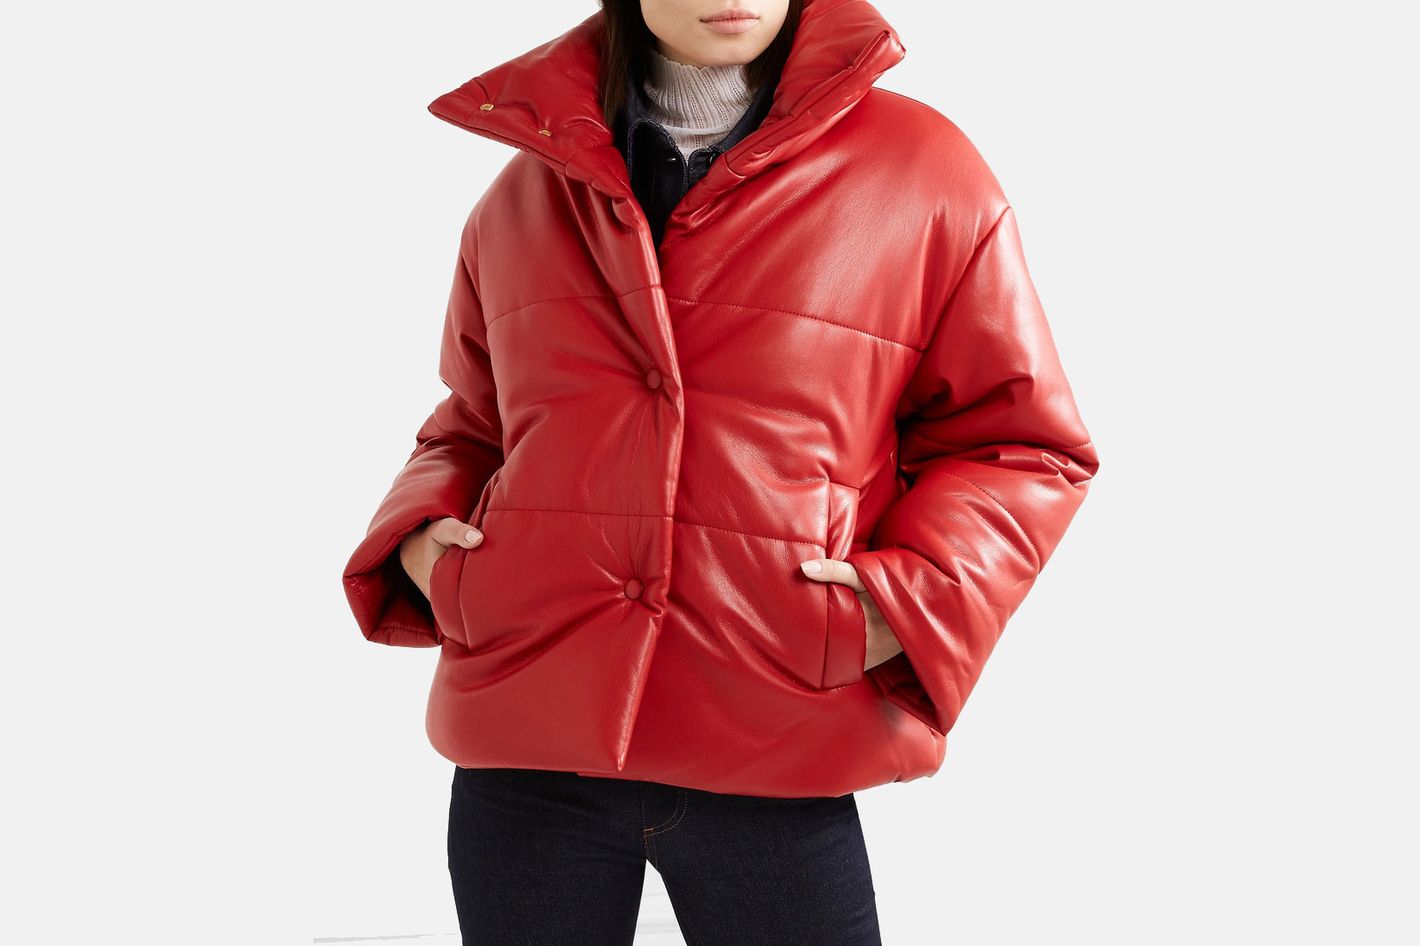 16 Red Winter Coats to Stand Out in the Crowd